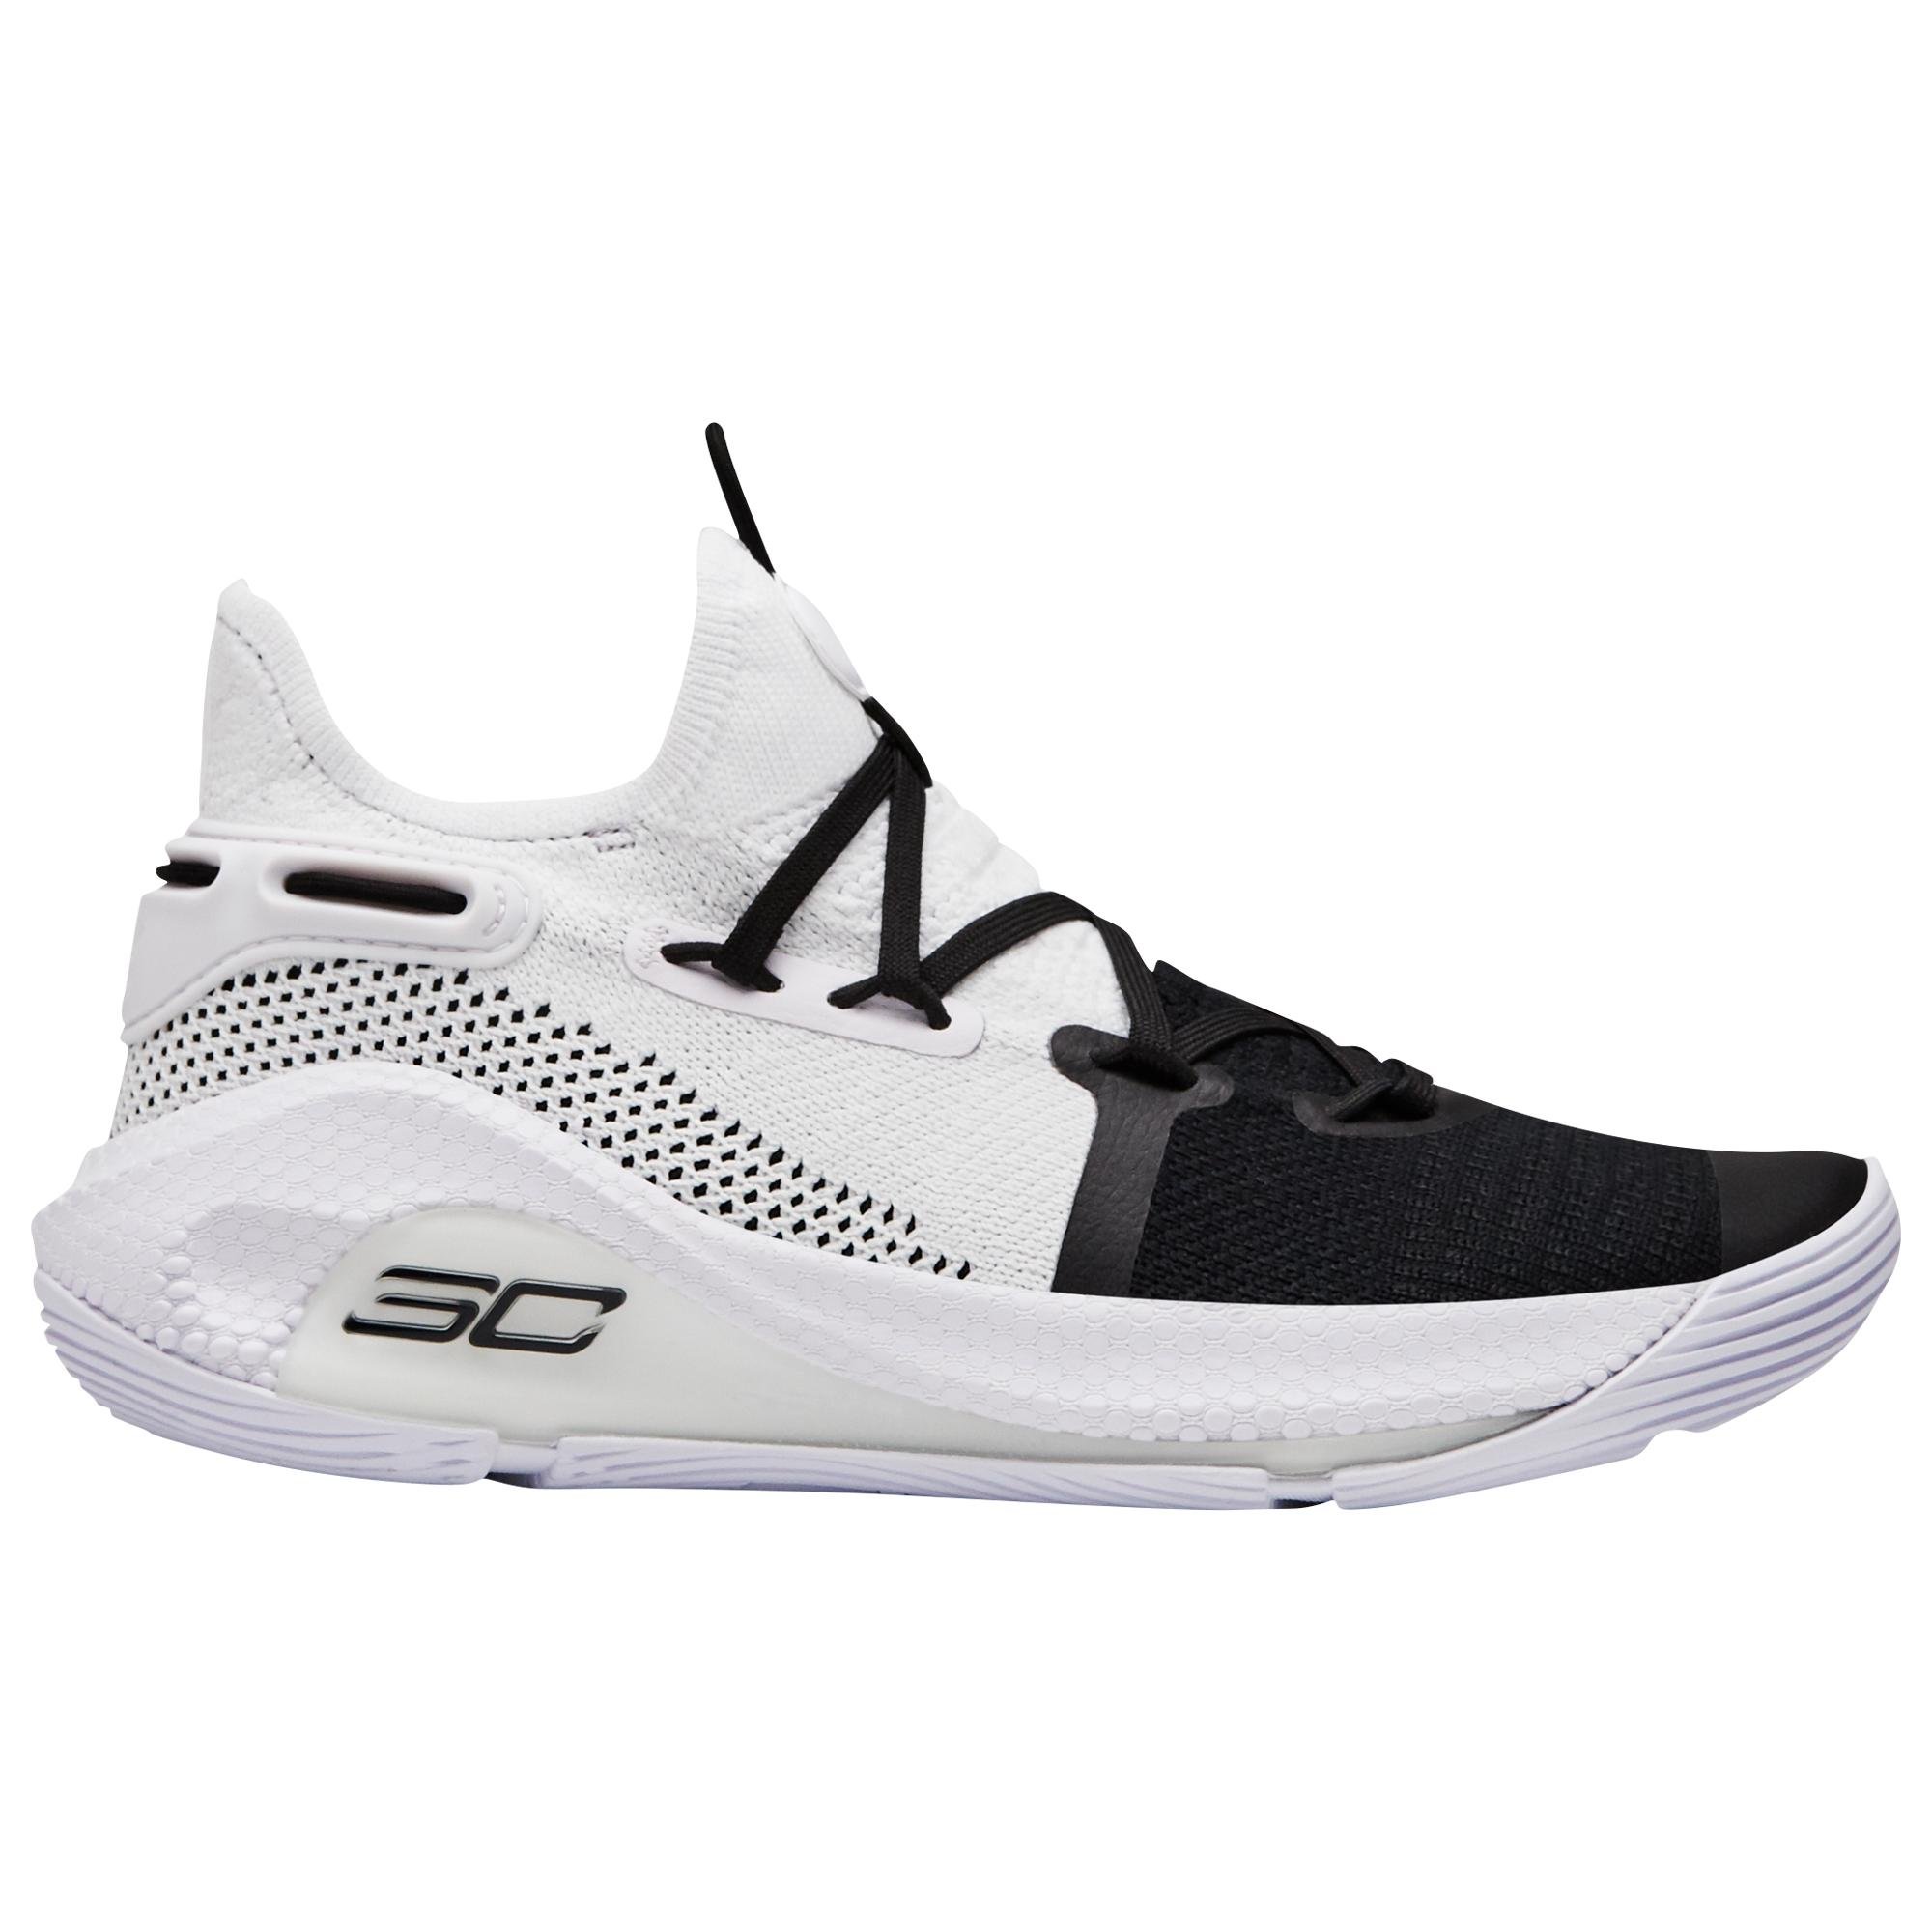 Under Armour Curry 6 Men's Basketball Shoe Lifestyle Stephen Curry sneaker 